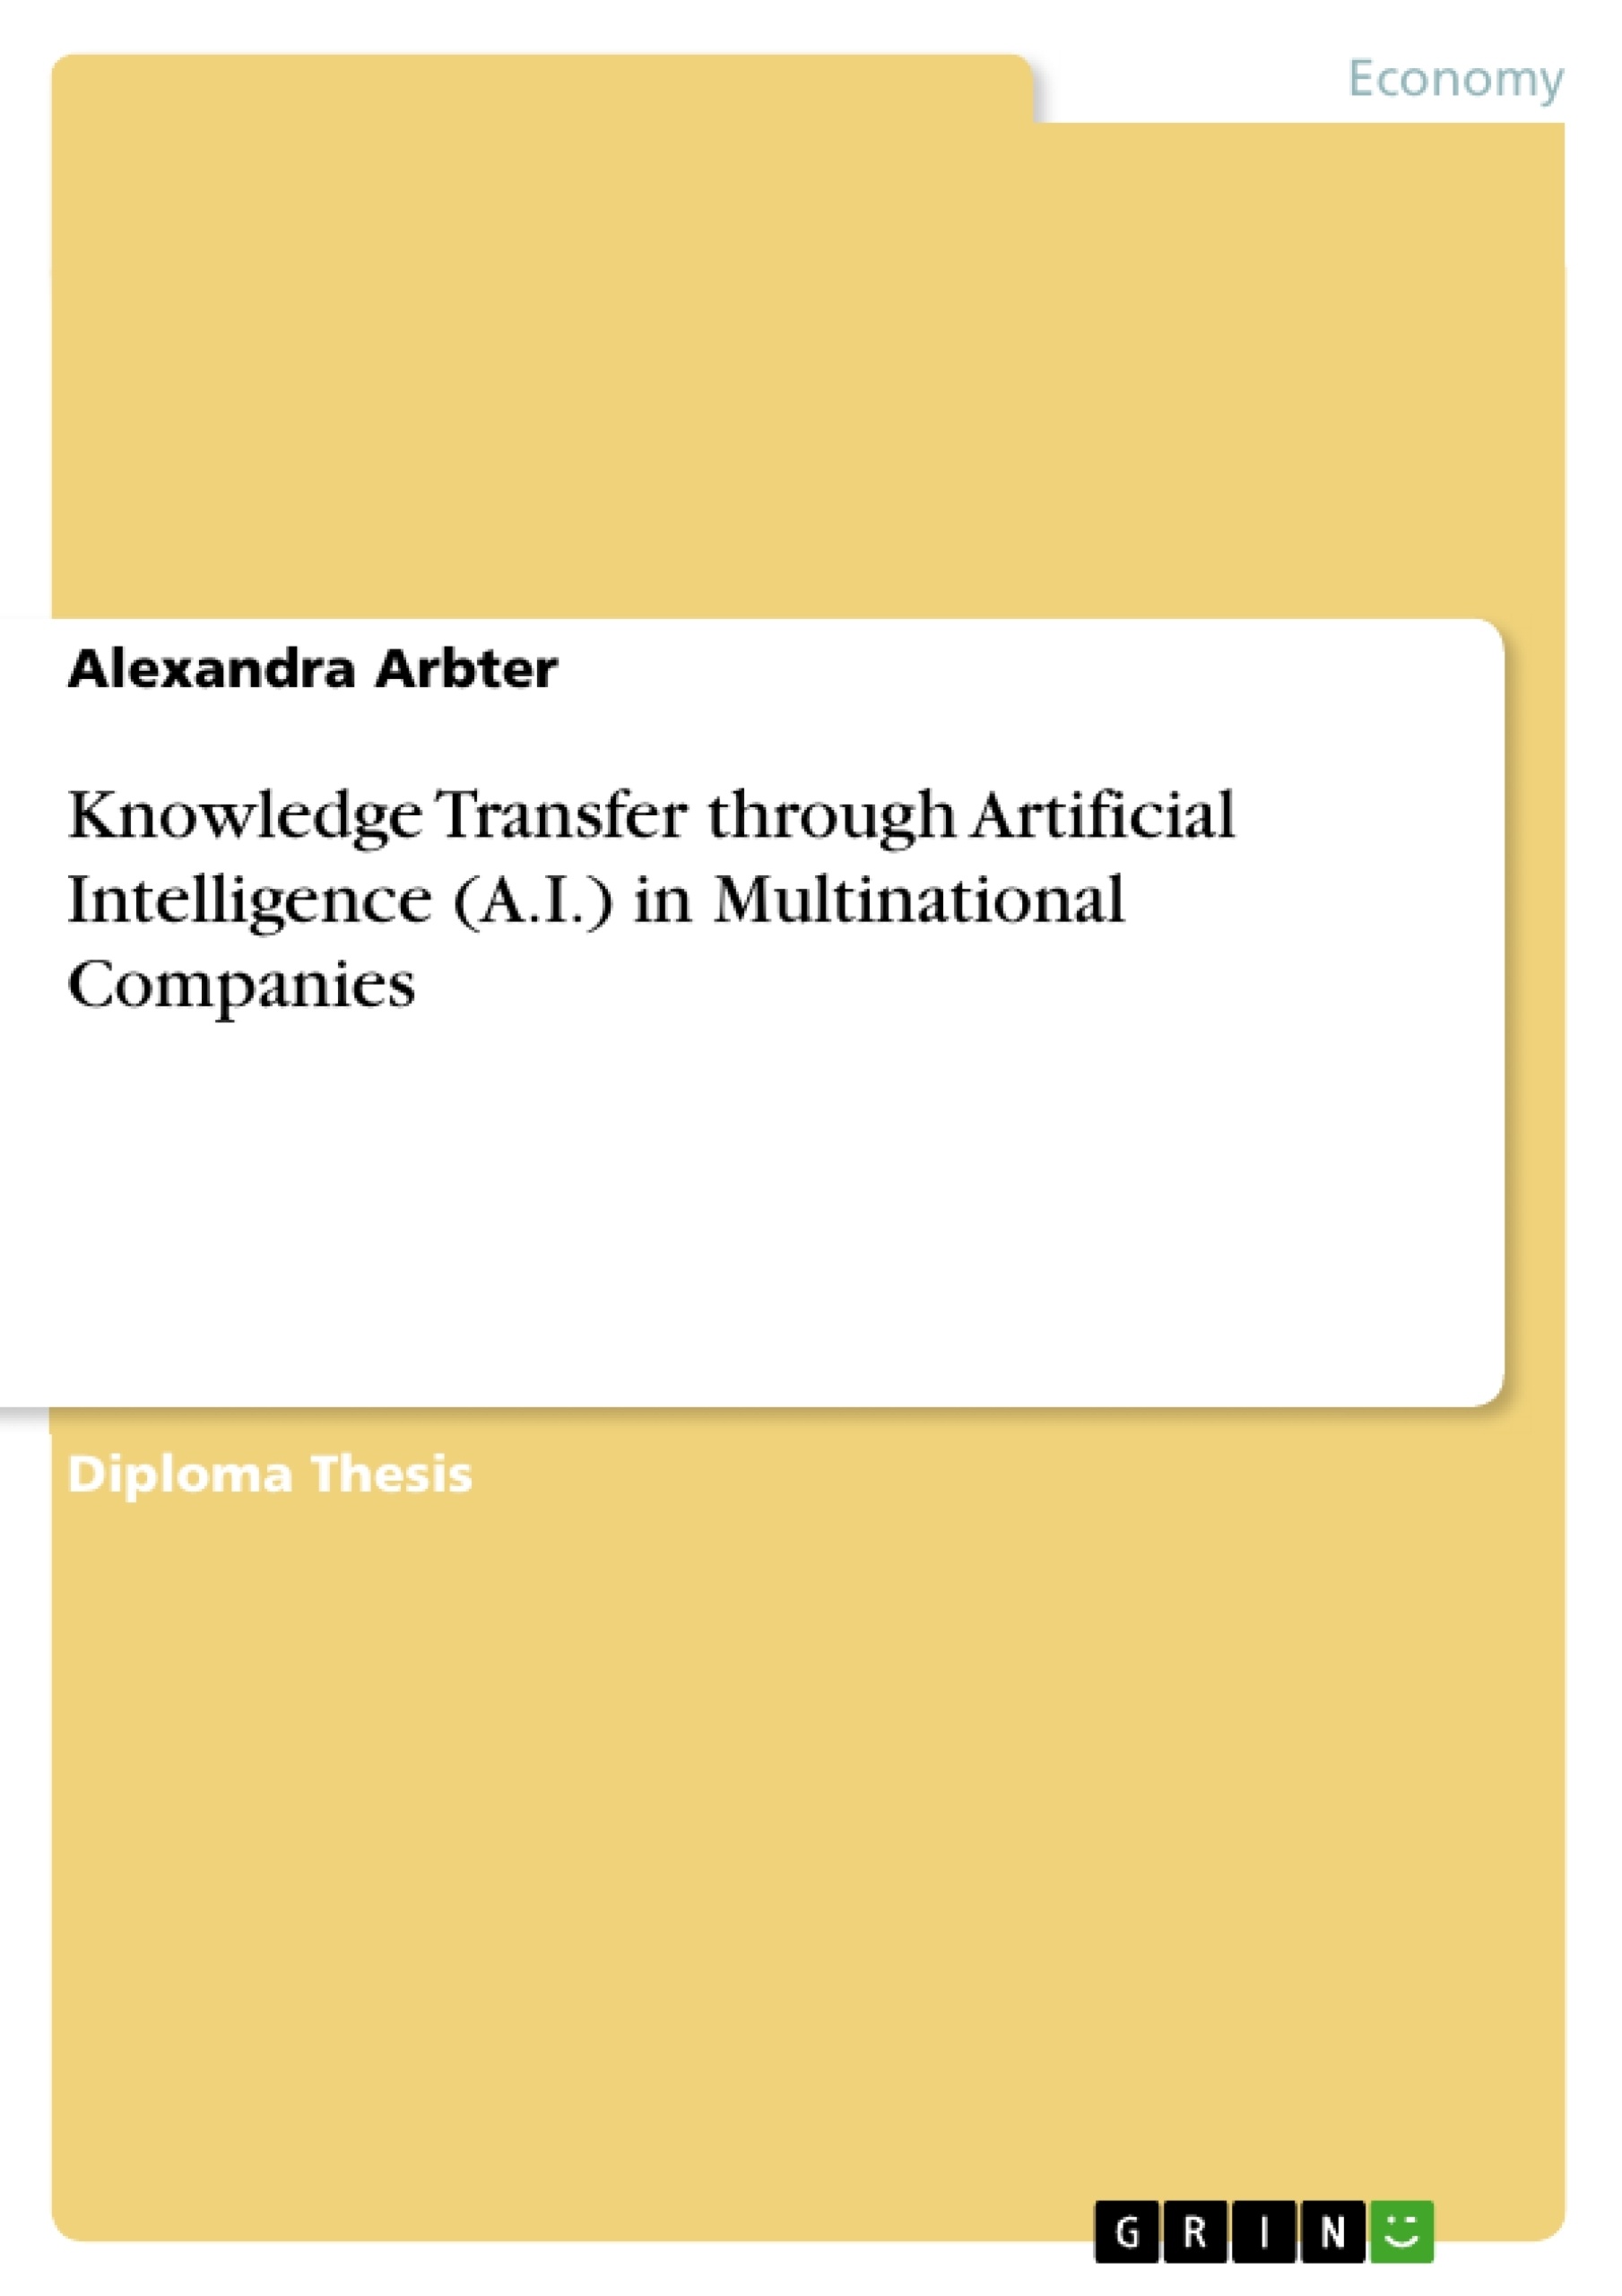 Título: Knowledge Transfer through Artificial Intelligence (A.I.) in Multinational Companies